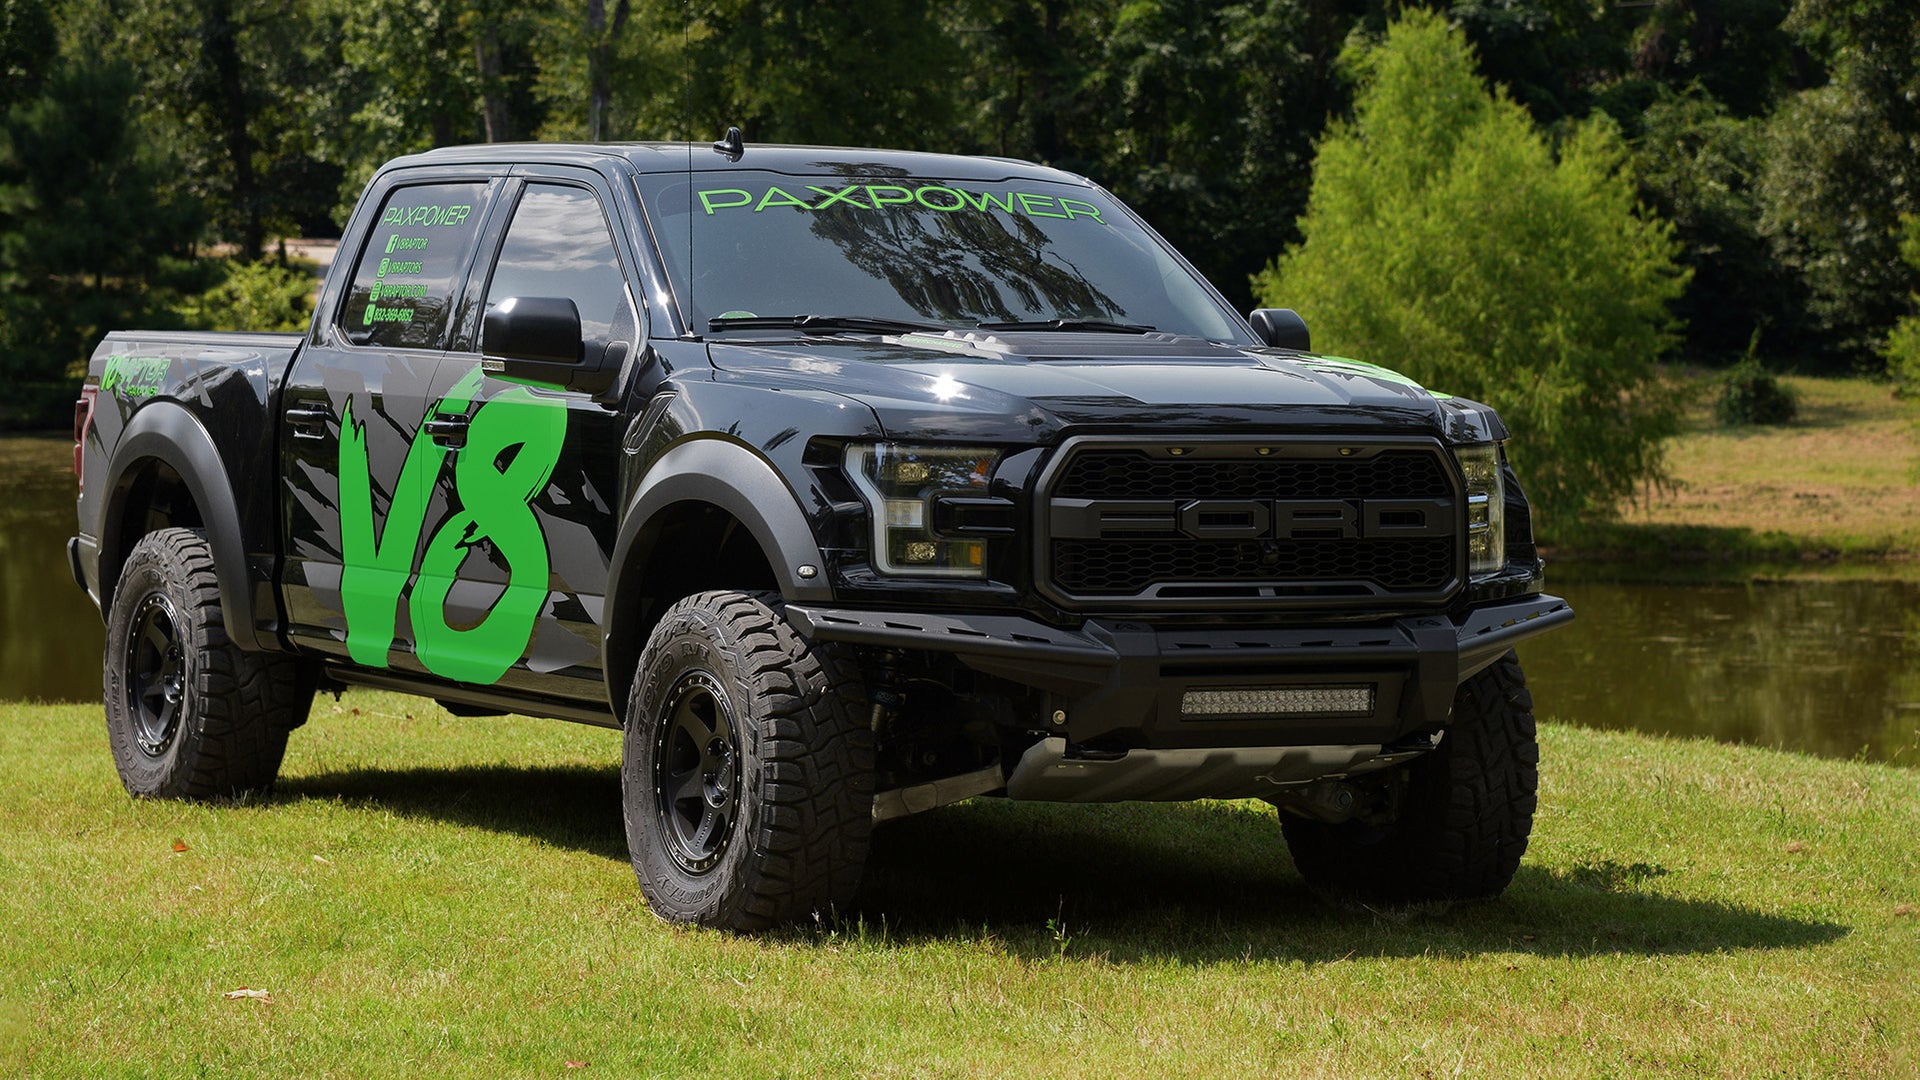 You Can Now Buy a V-8 or Diesel-Powered Ford F-150 Raptor Pickup Truck ...